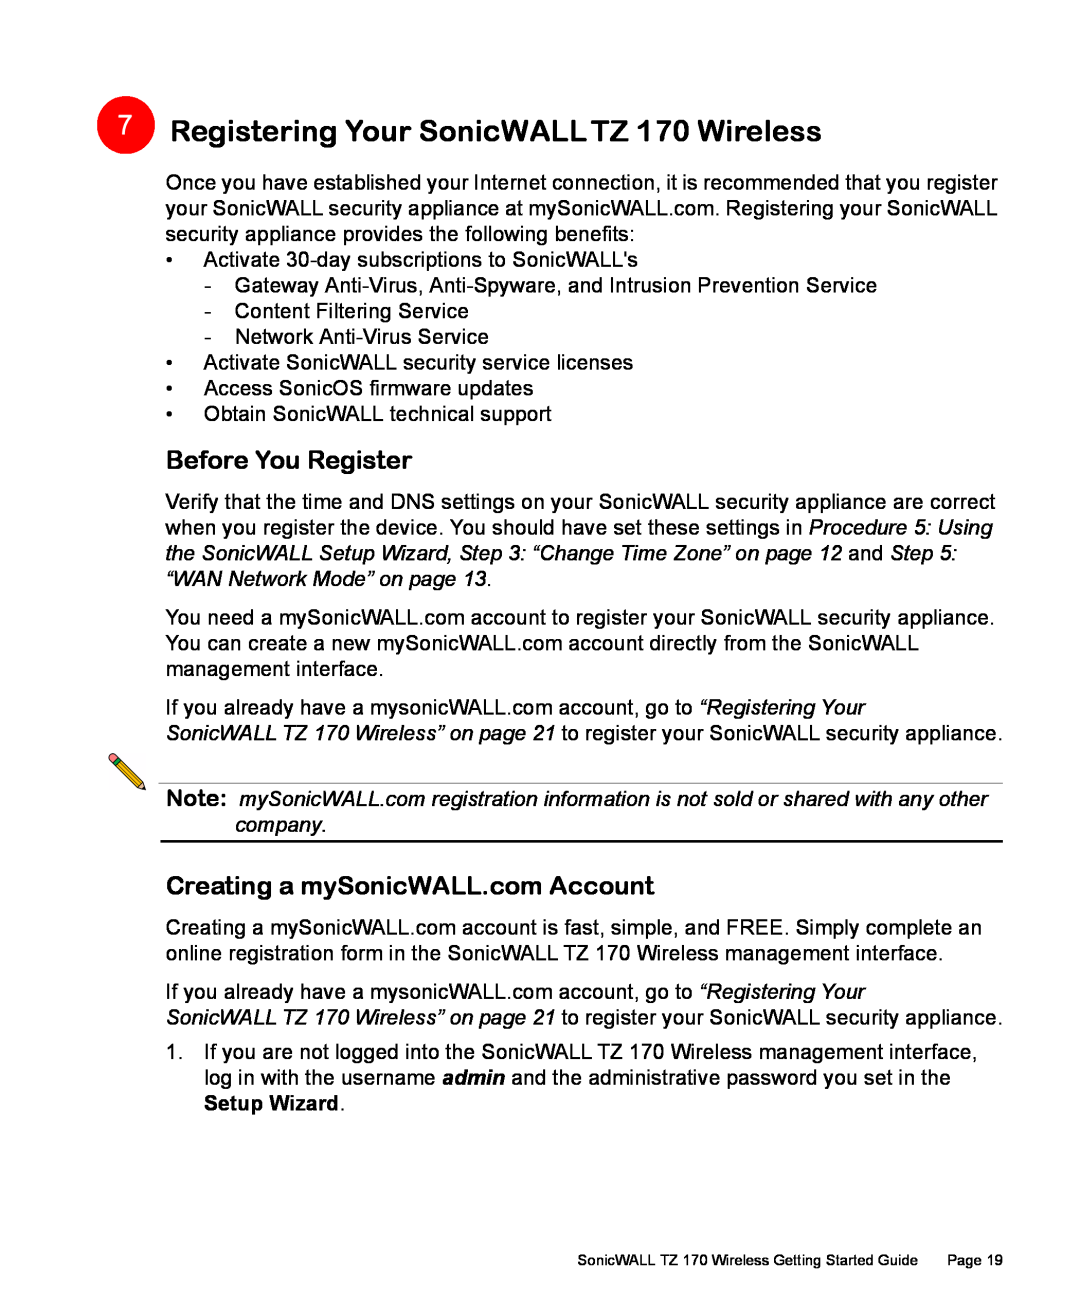 SonicWALL manual Registering Your SonicWALL TZ 170 Wireless, Before You Register 